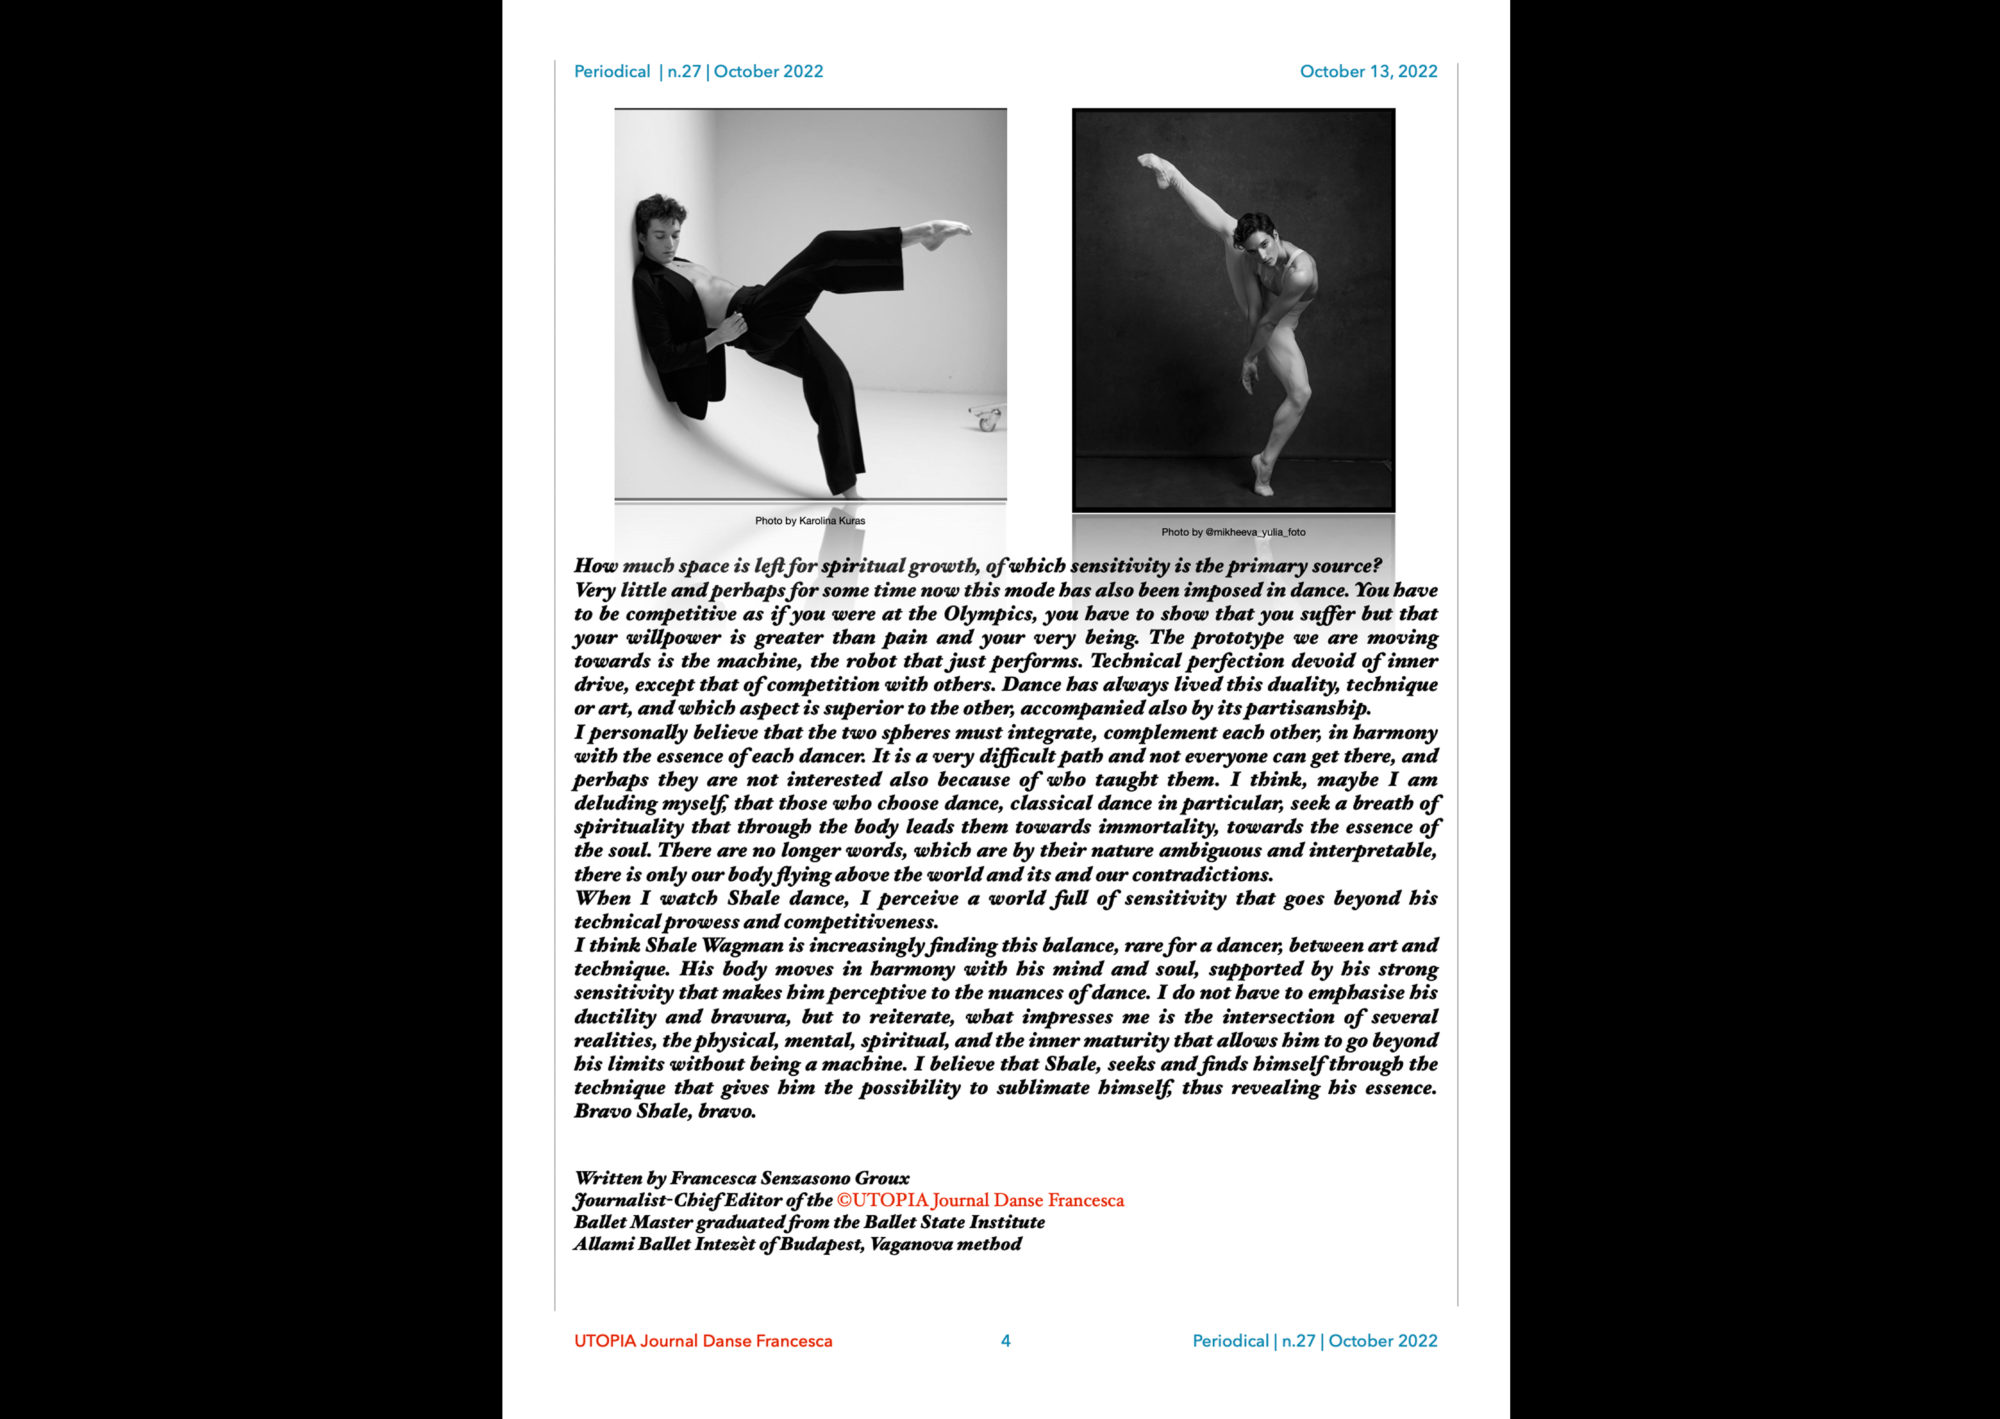 ©UTOPIA Journal Dance Francesca Periodical n.27 October 13, 2022 page 4